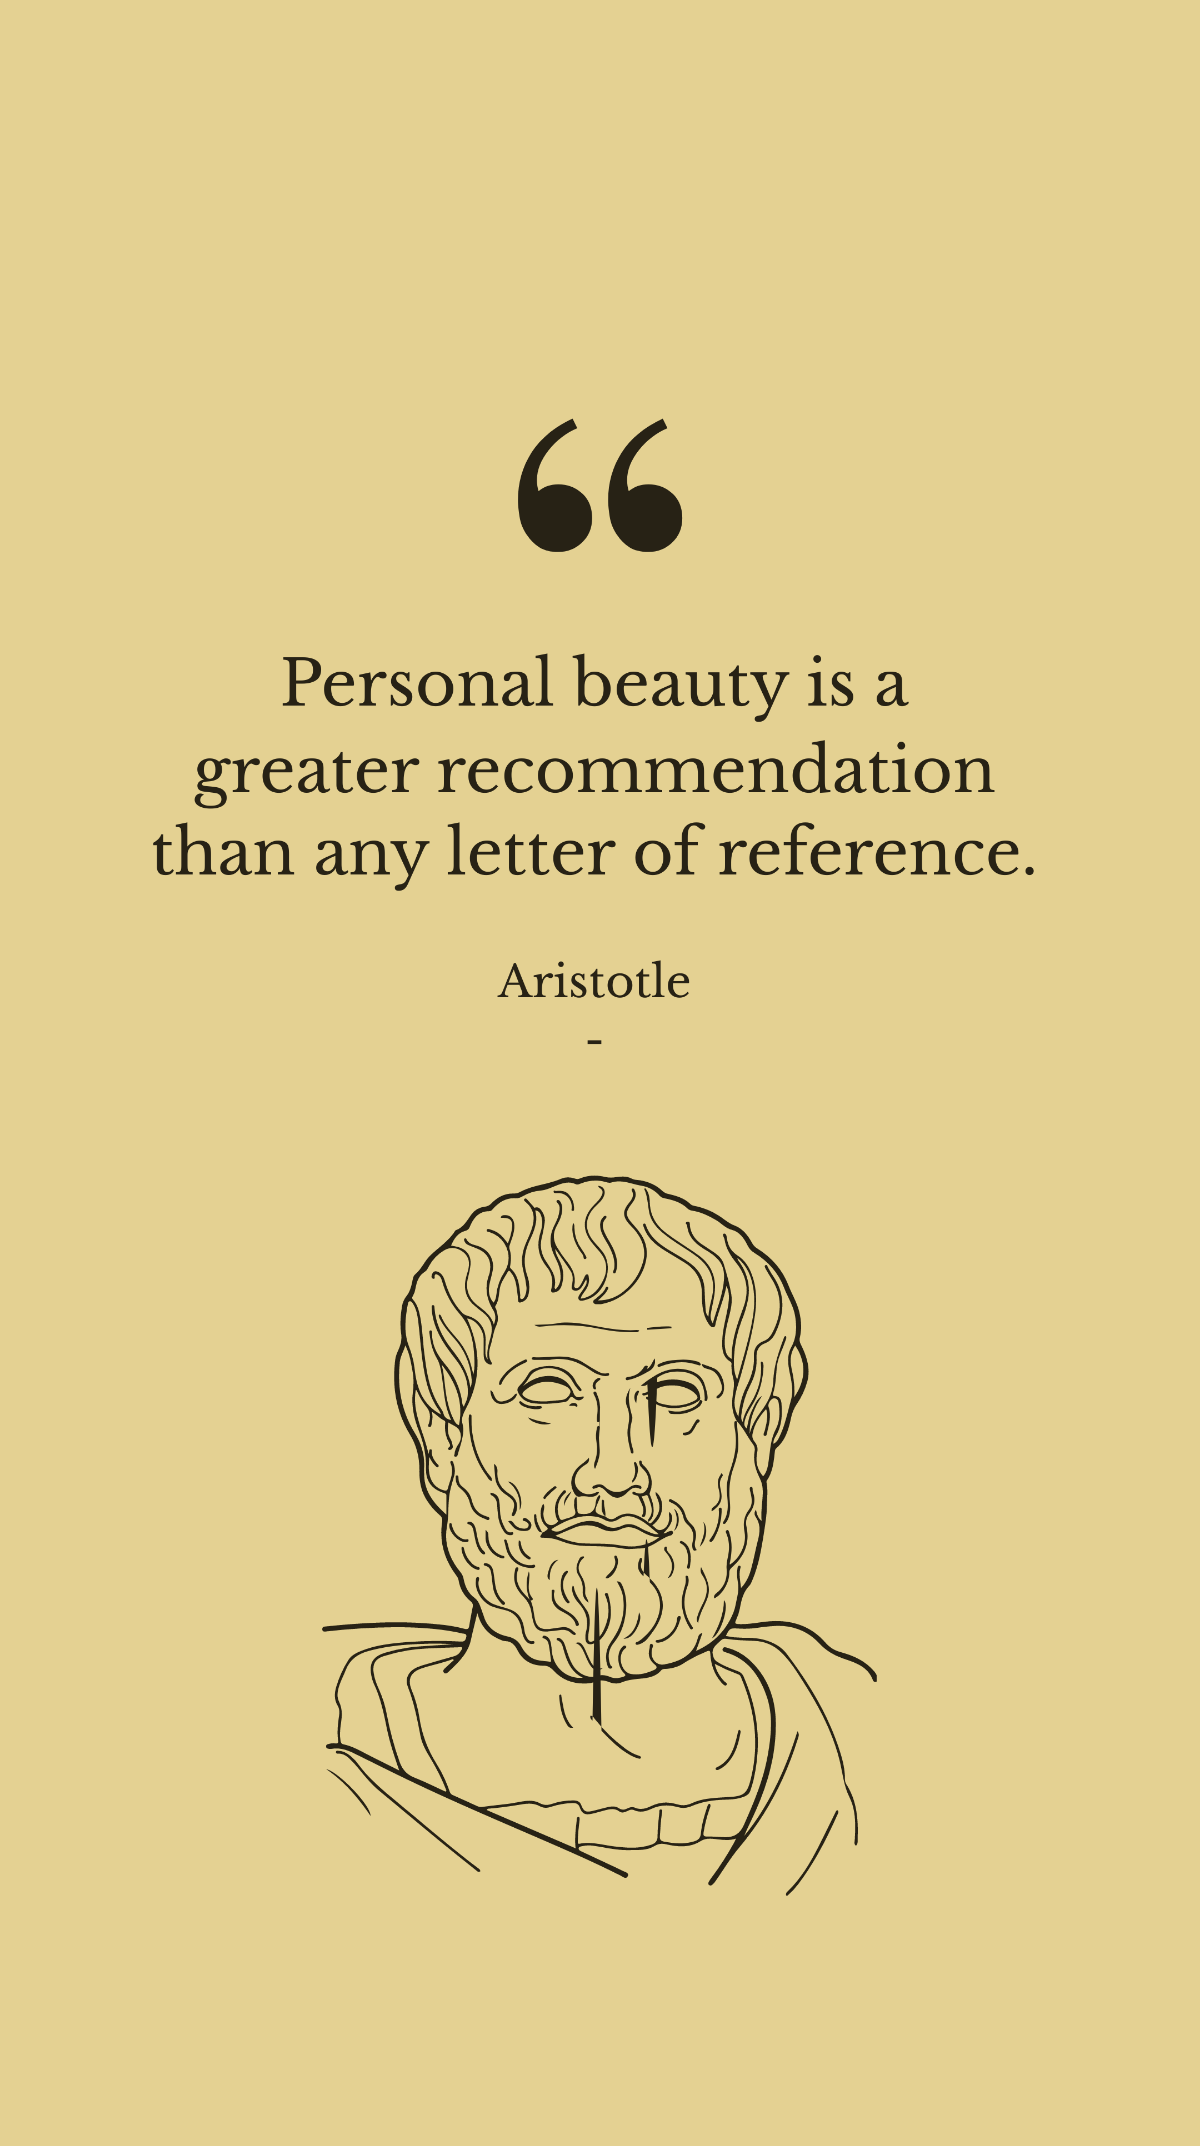 Aristotle - Personal beauty is a greater recommendation than any letter of reference. Template